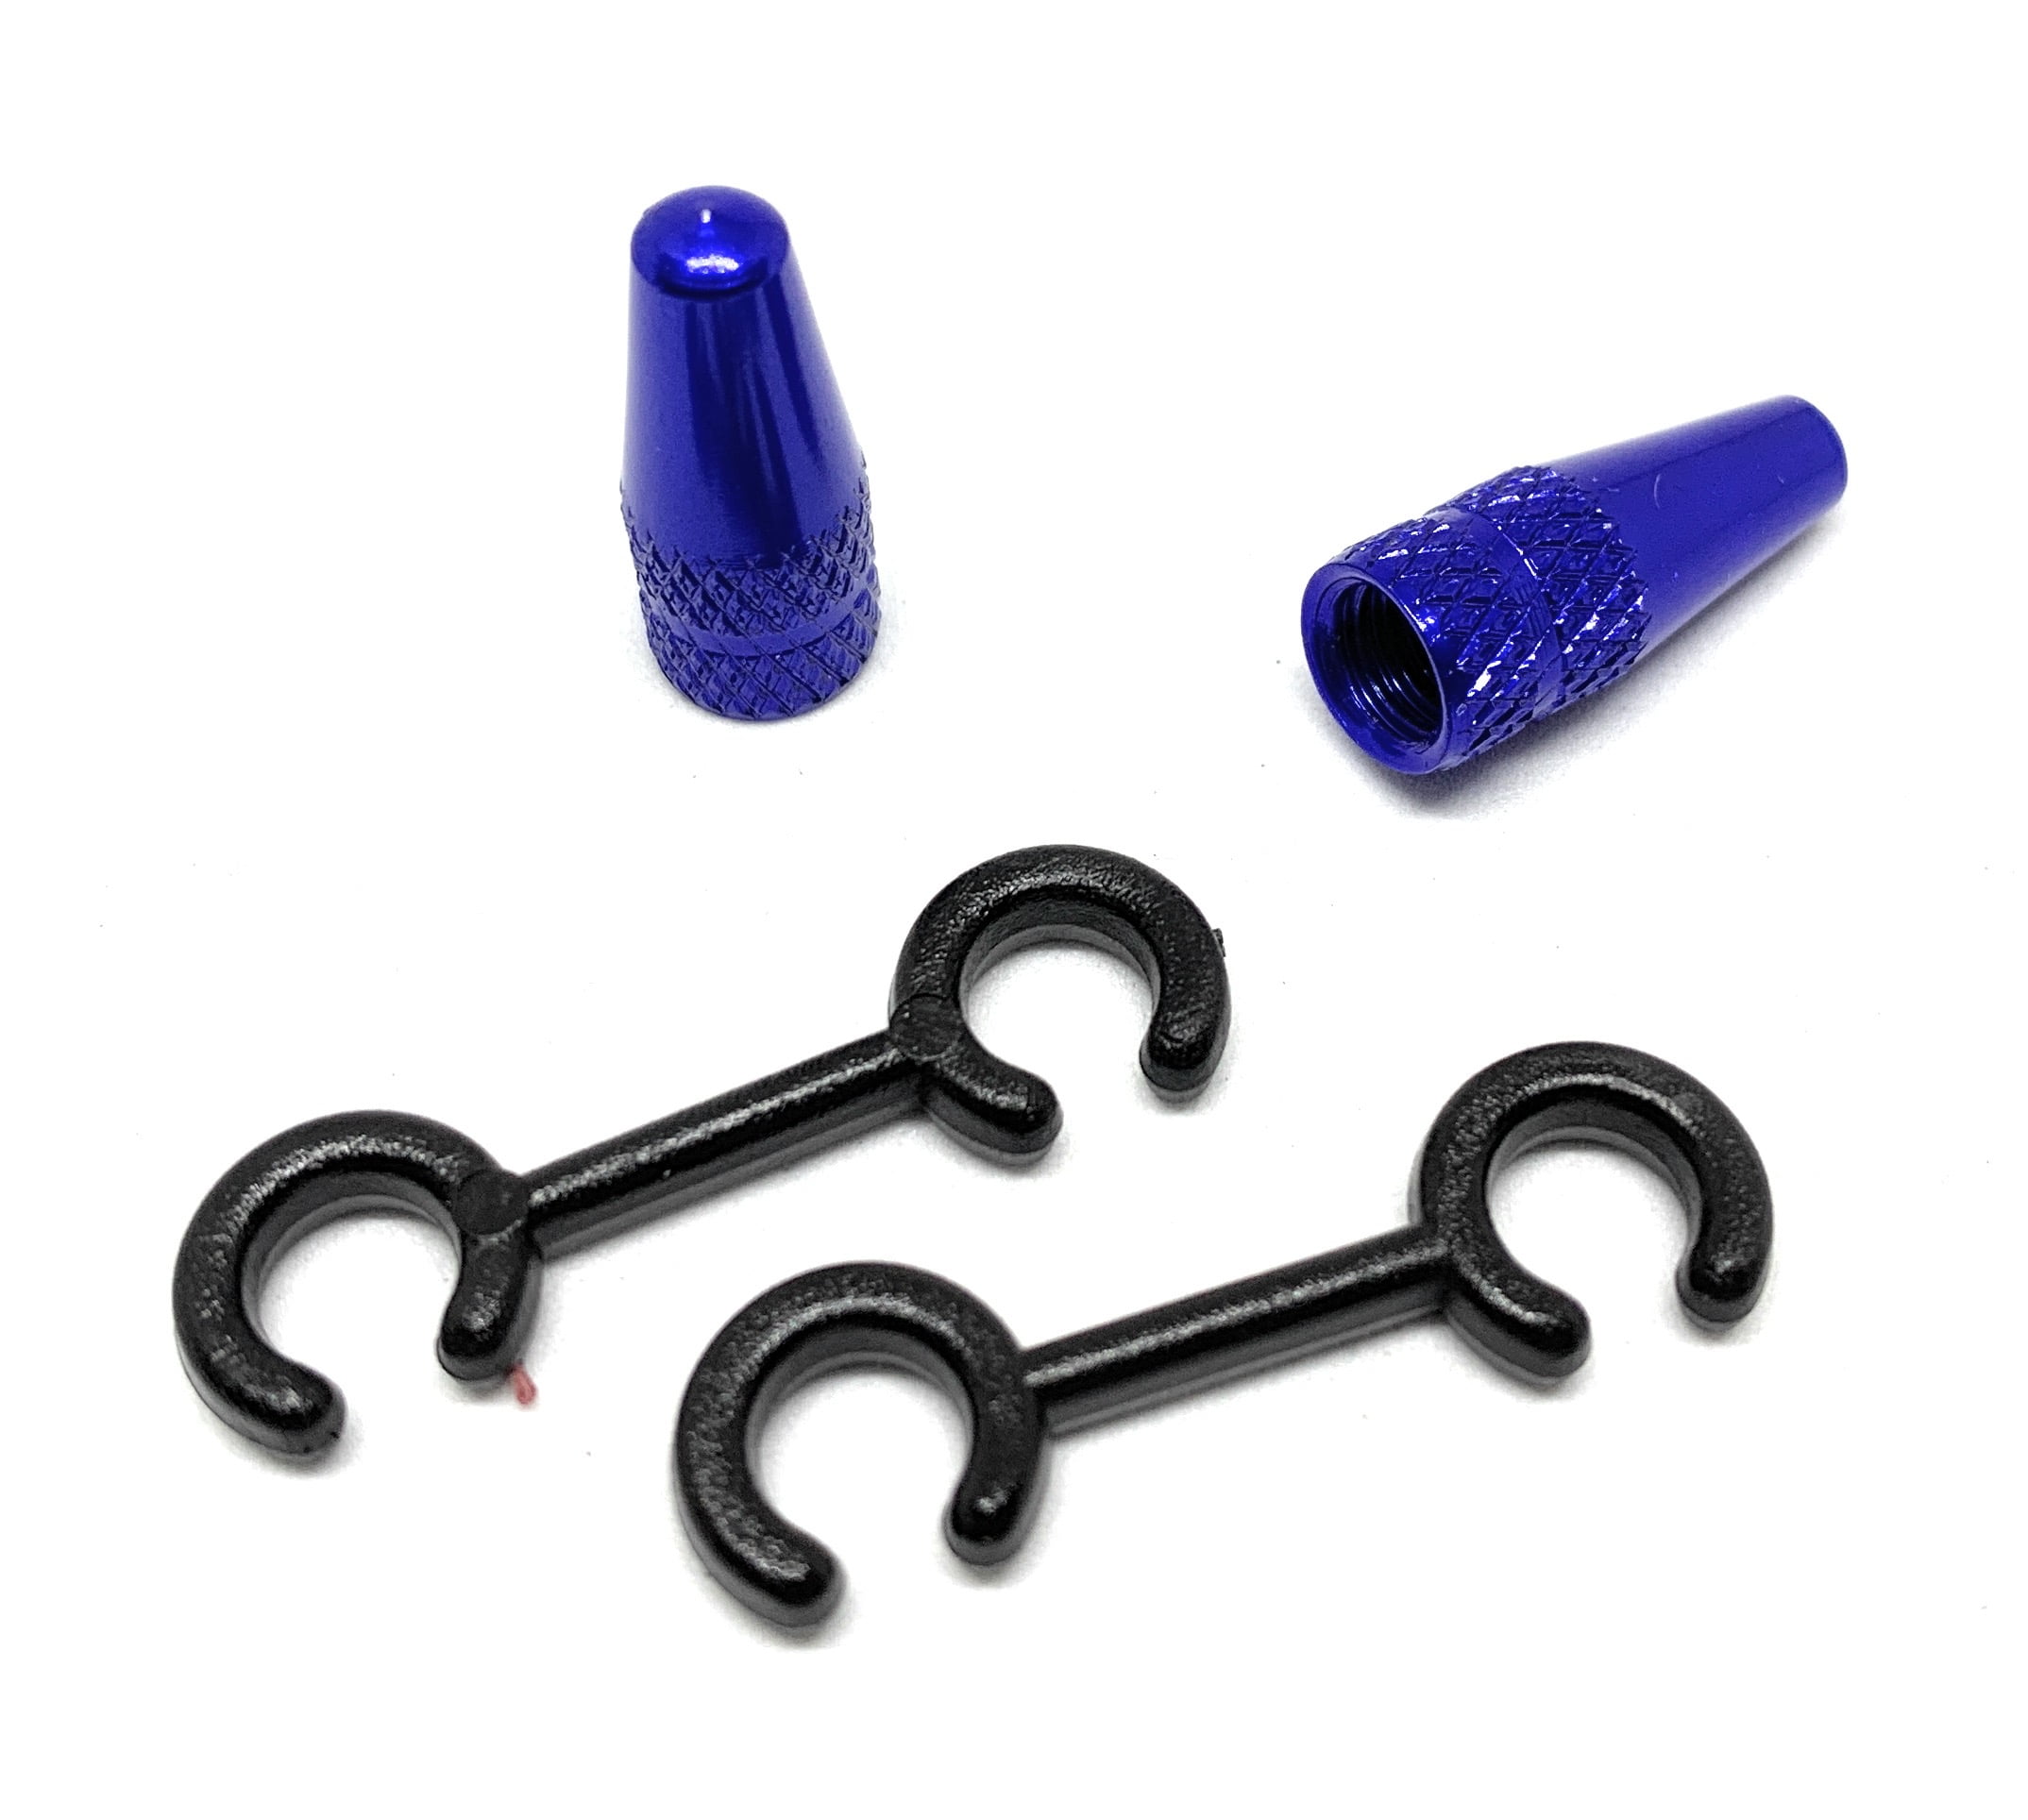 Blue Presta valve caps anodized aluminum use on presto or French valves.  For MTB, race or street bicycle. Bonus cable organizer and sticker. -  Hardheaded Ram - Bicycle brakes & Accessories